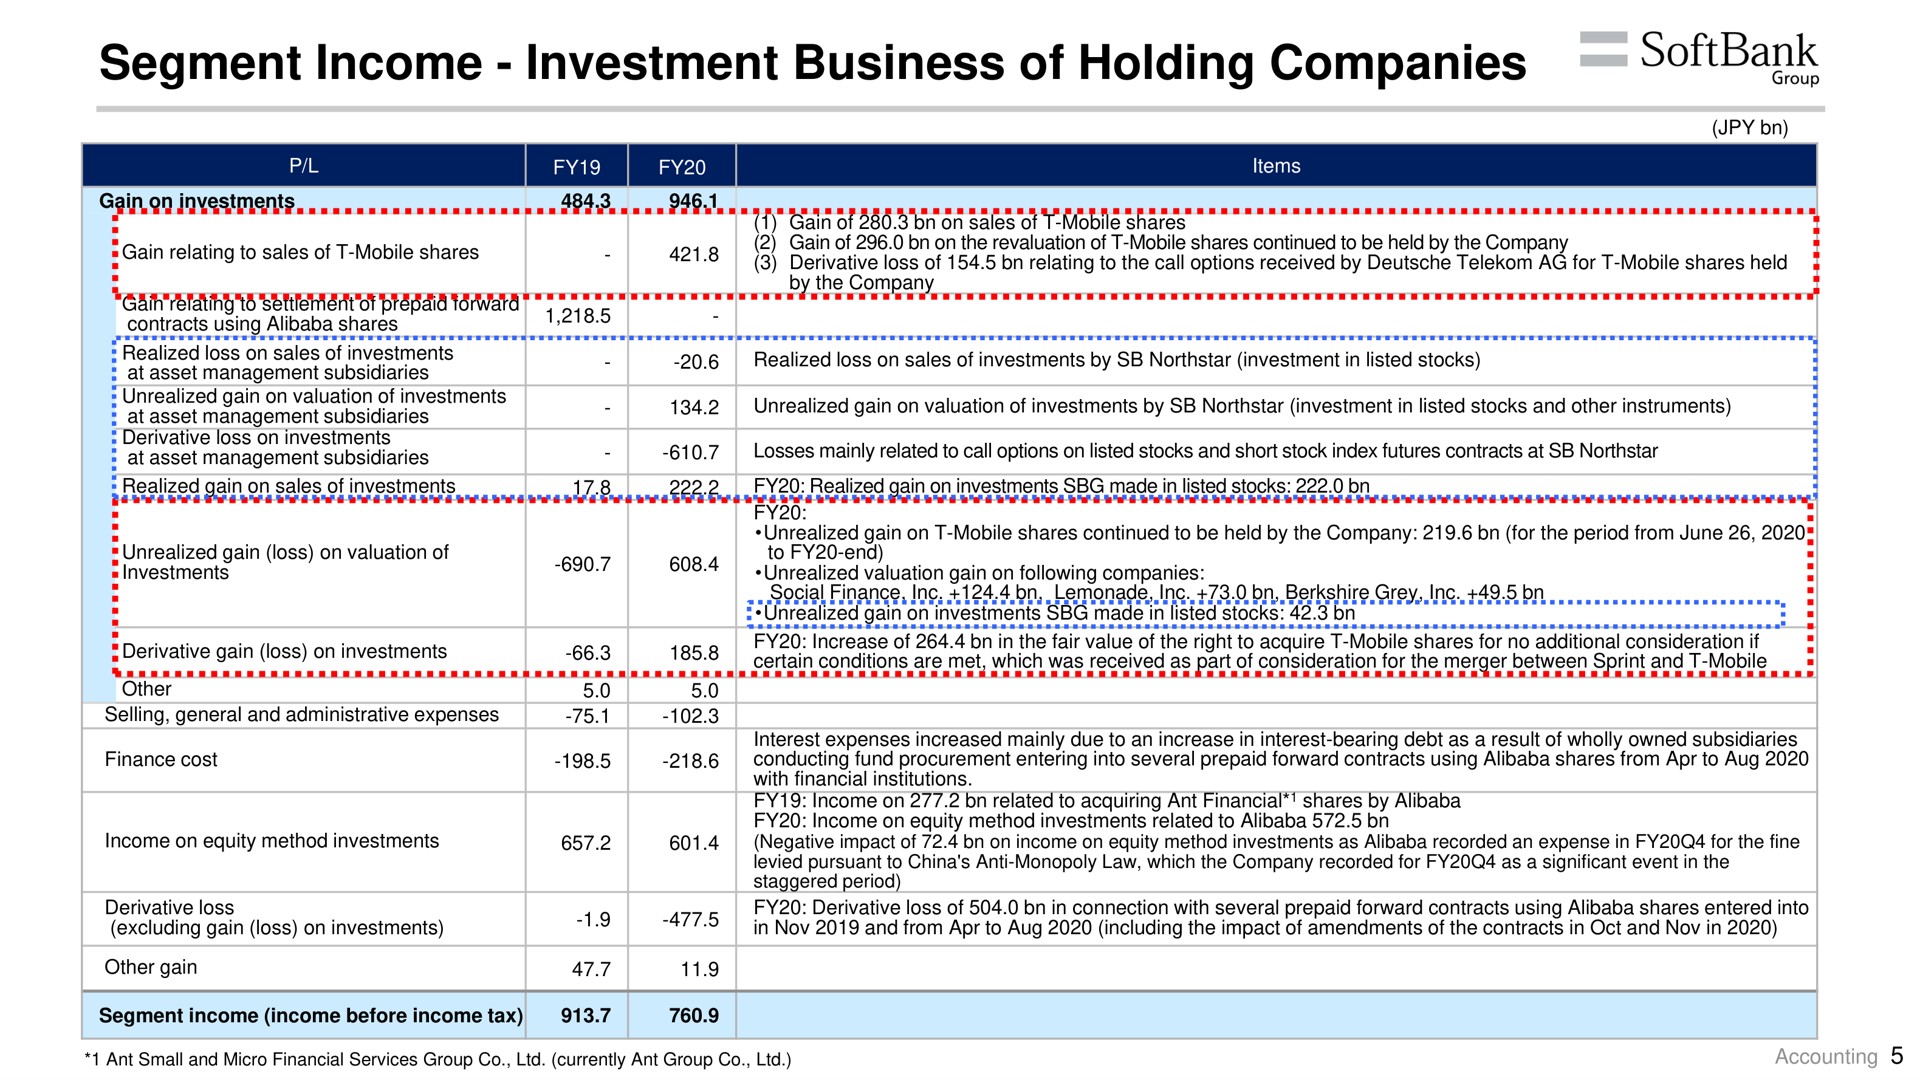 segment income investment business of holding companies | SoftBank